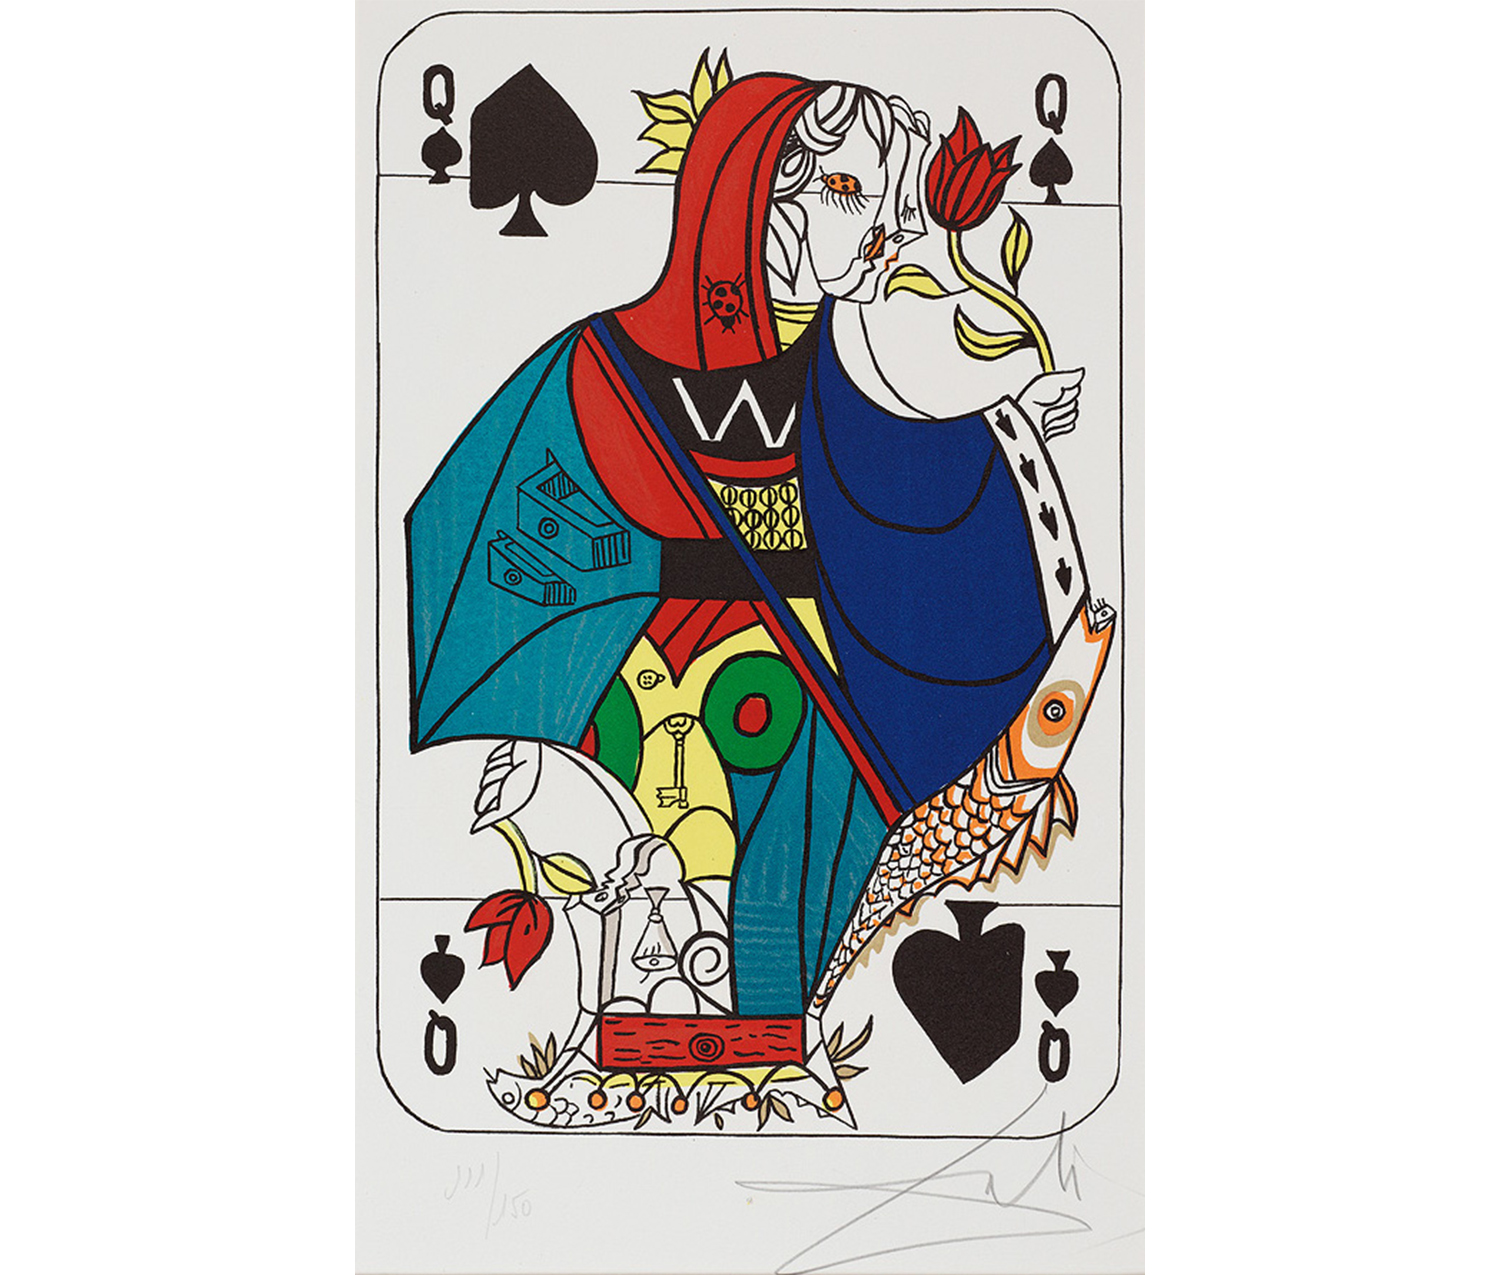 playing card with a woman wearing a red and blue cloak, holding a rose to her nose